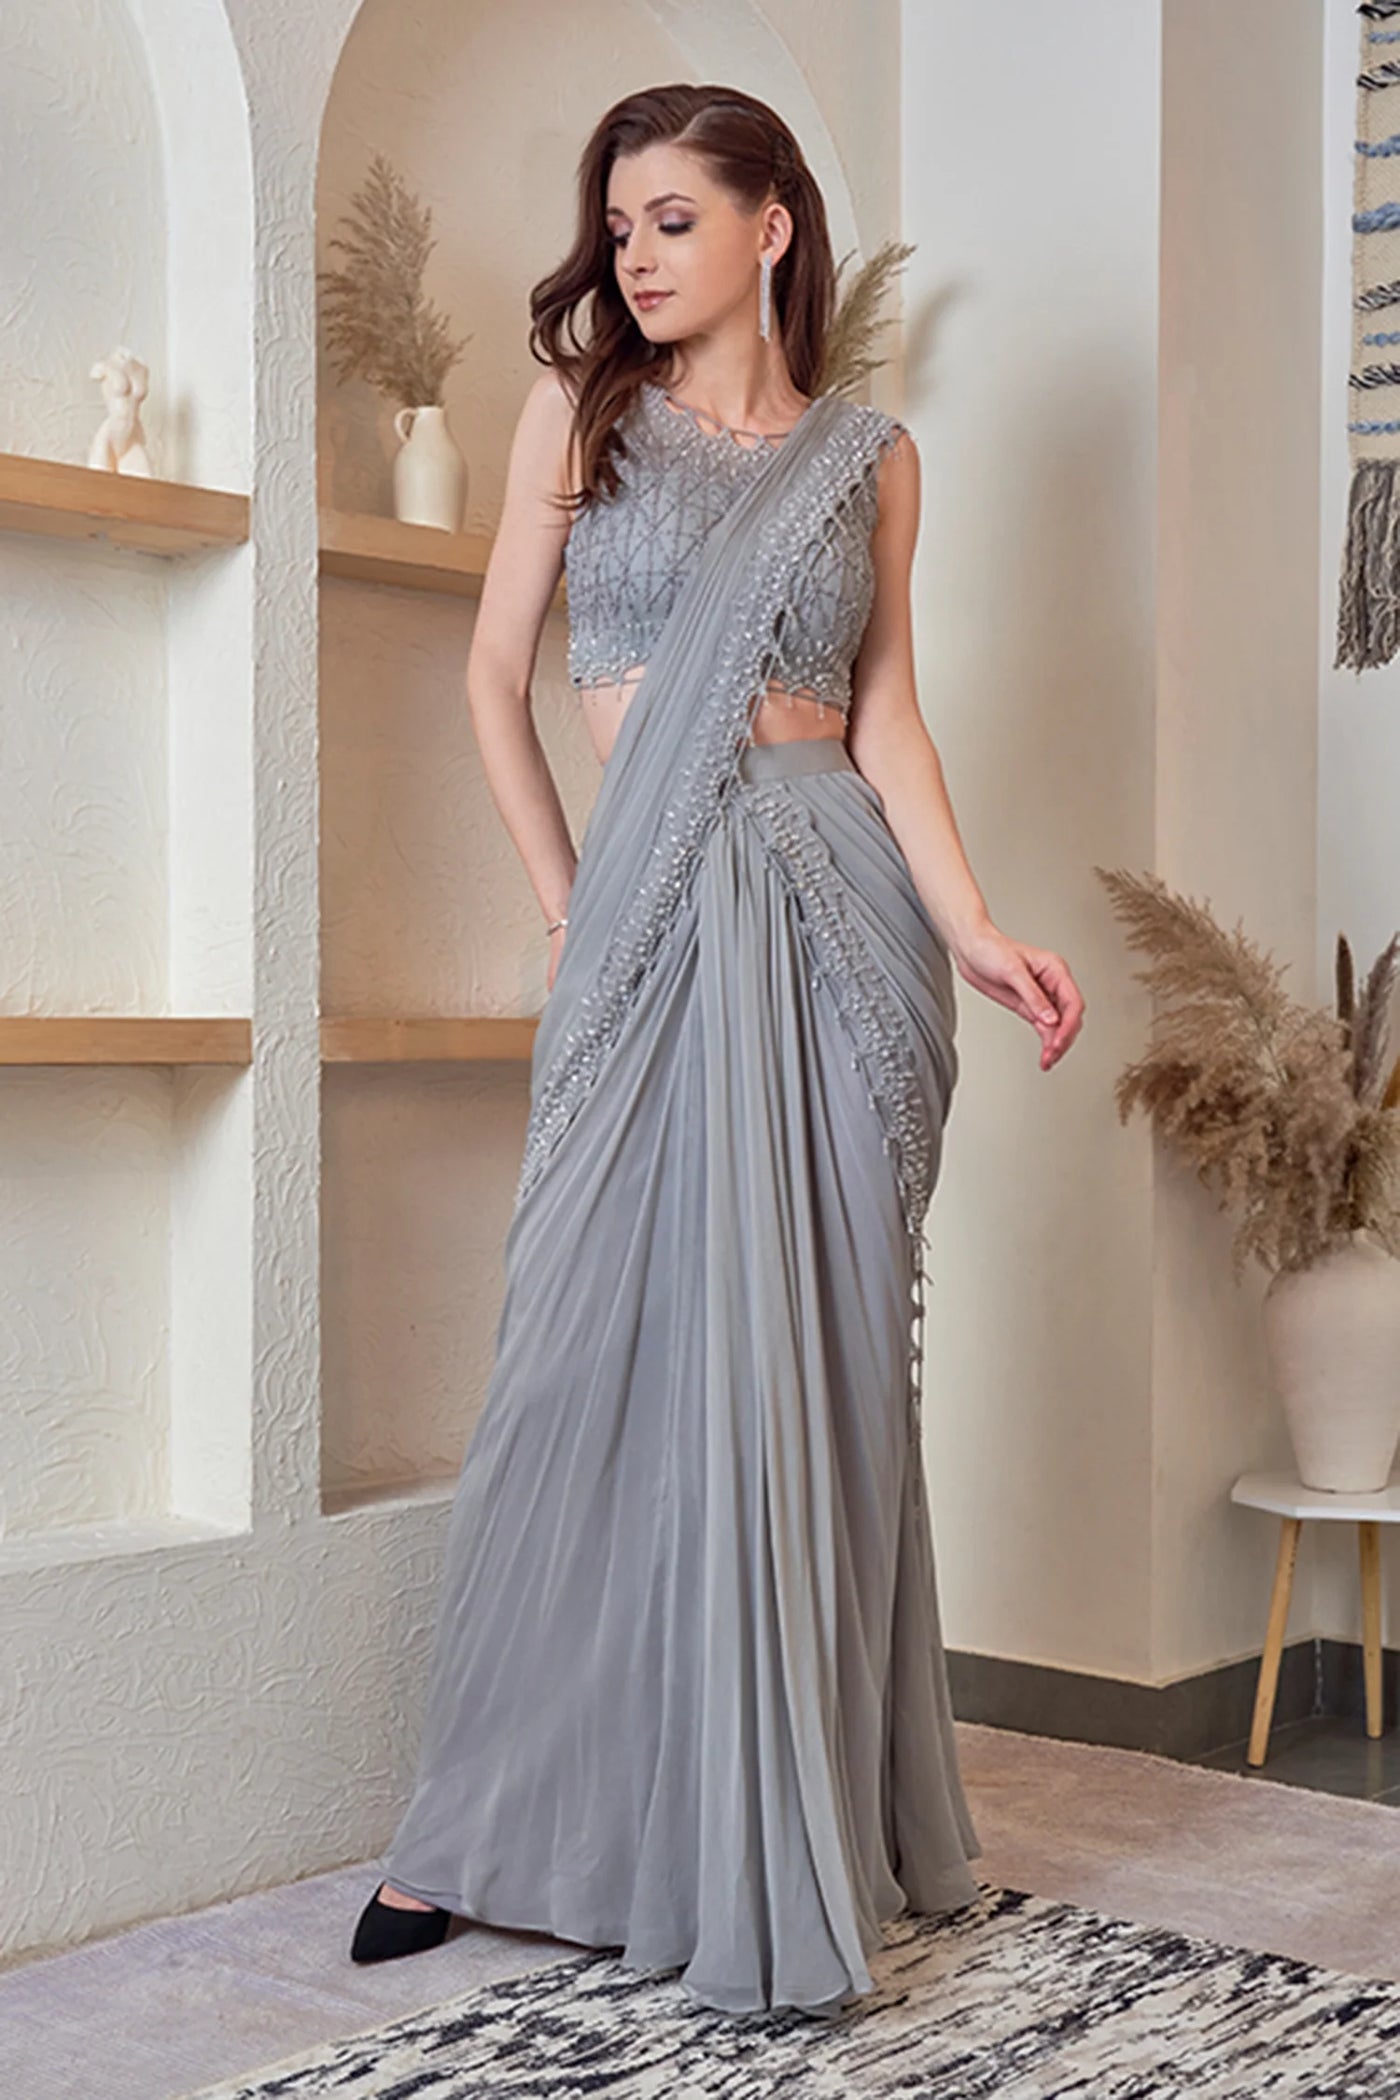 Rocky Grey Pre-draped Saree - Indian Clothing in Denver, CO, Aurora, CO, Boulder, CO, Fort Collins, CO, Colorado Springs, CO, Parker, CO, Highlands Ranch, CO, Cherry Creek, CO, Centennial, CO, and Longmont, CO. Nationwide shipping USA - India Fashion X